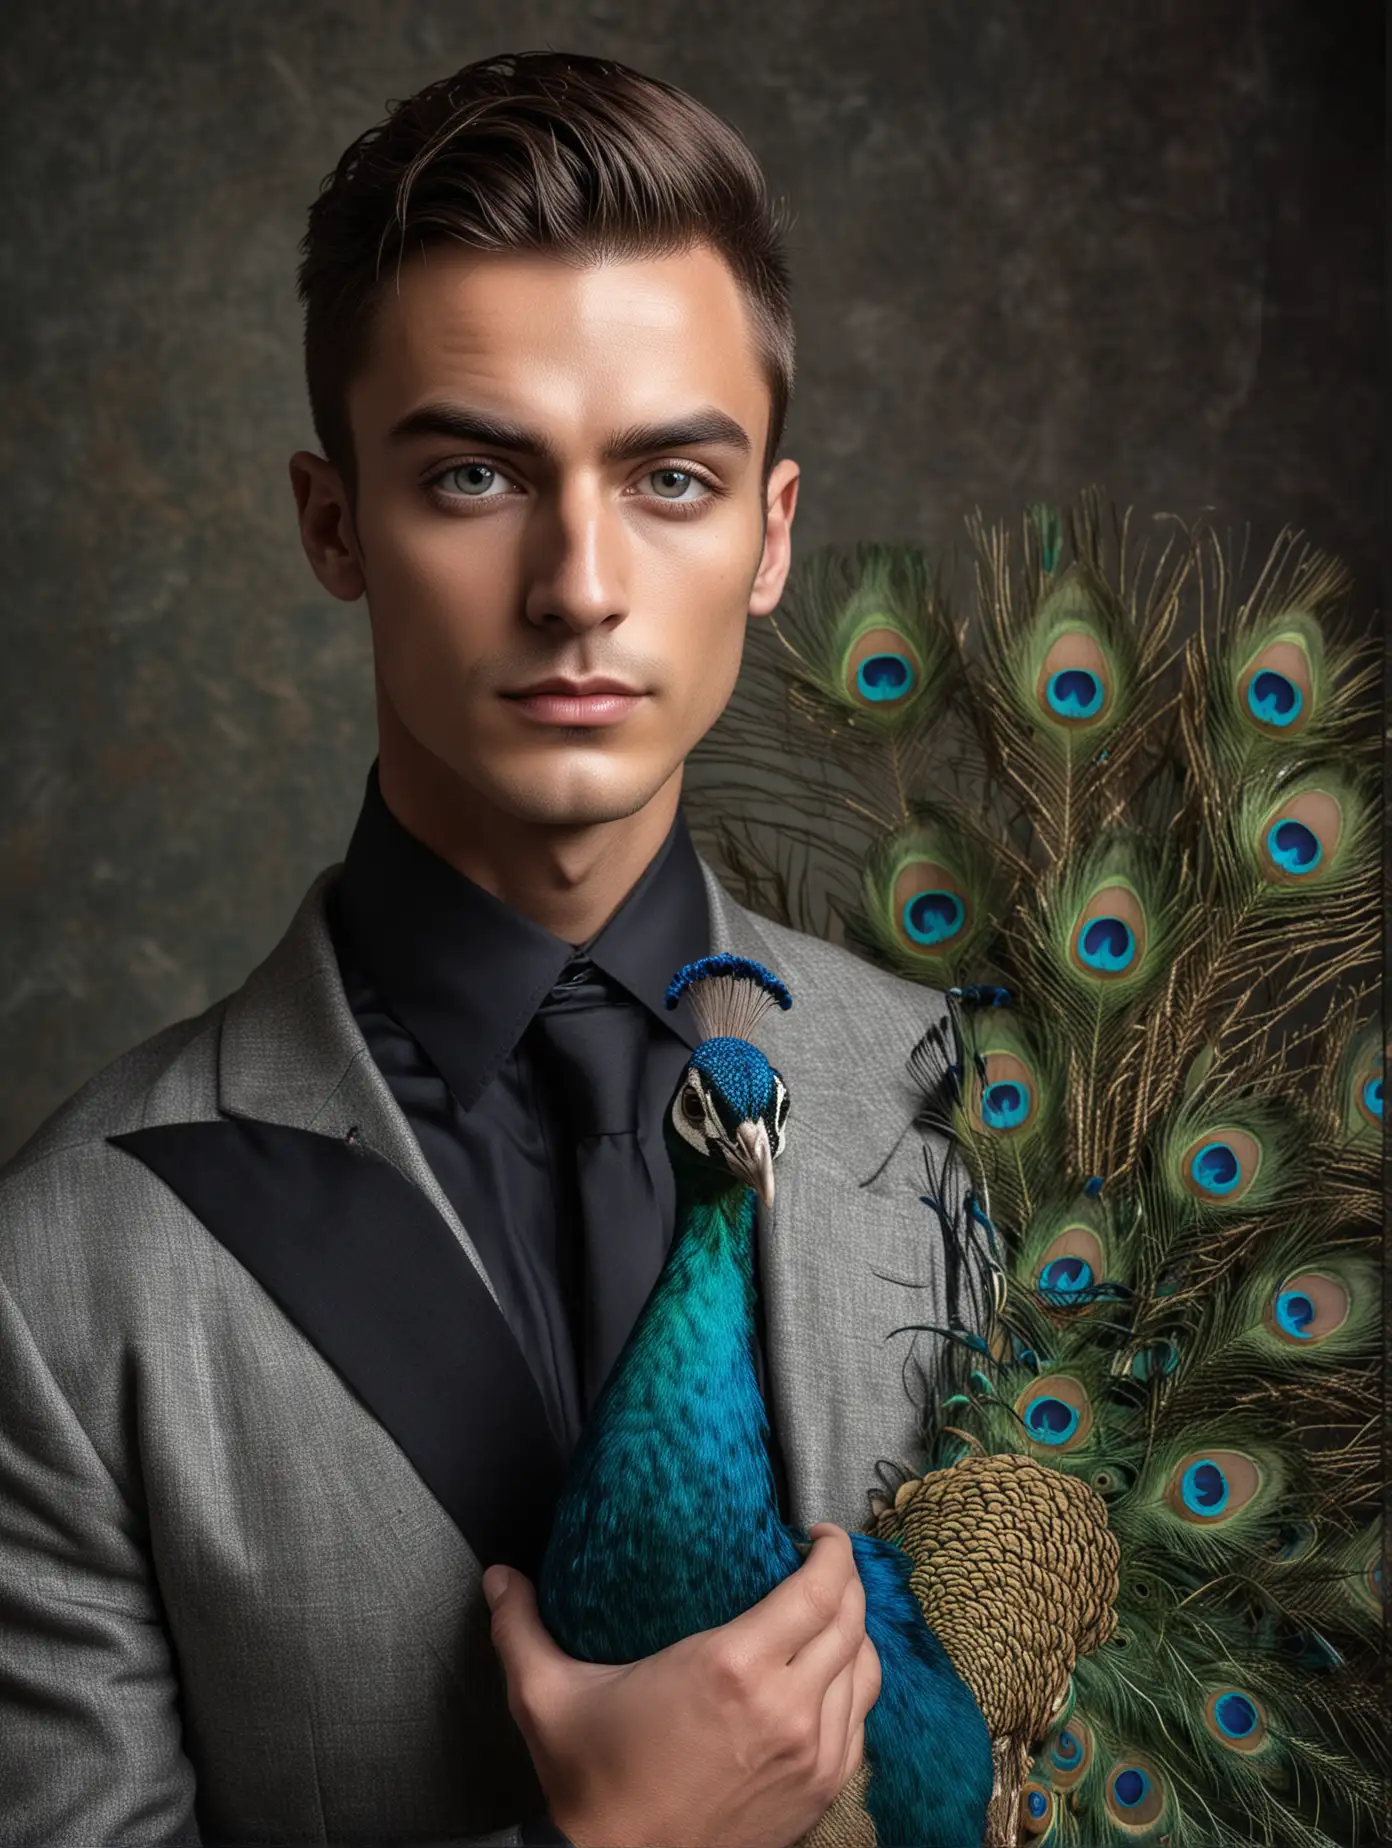 Exquisite Man and Peacock Professional Photography Portrait